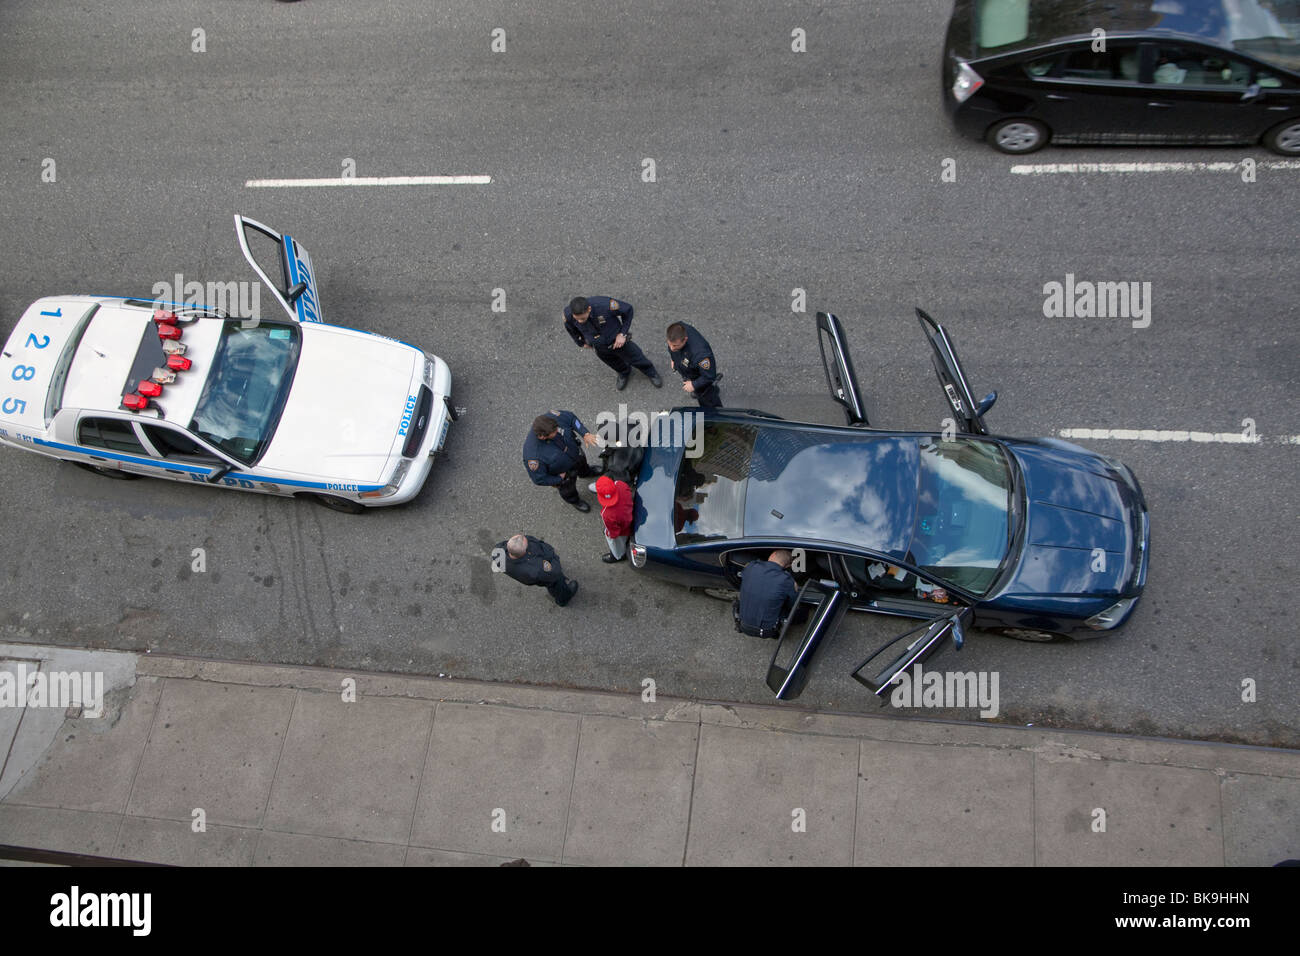 Police officers stop a car with two male suspects in New York City and search their car. Stock Photo